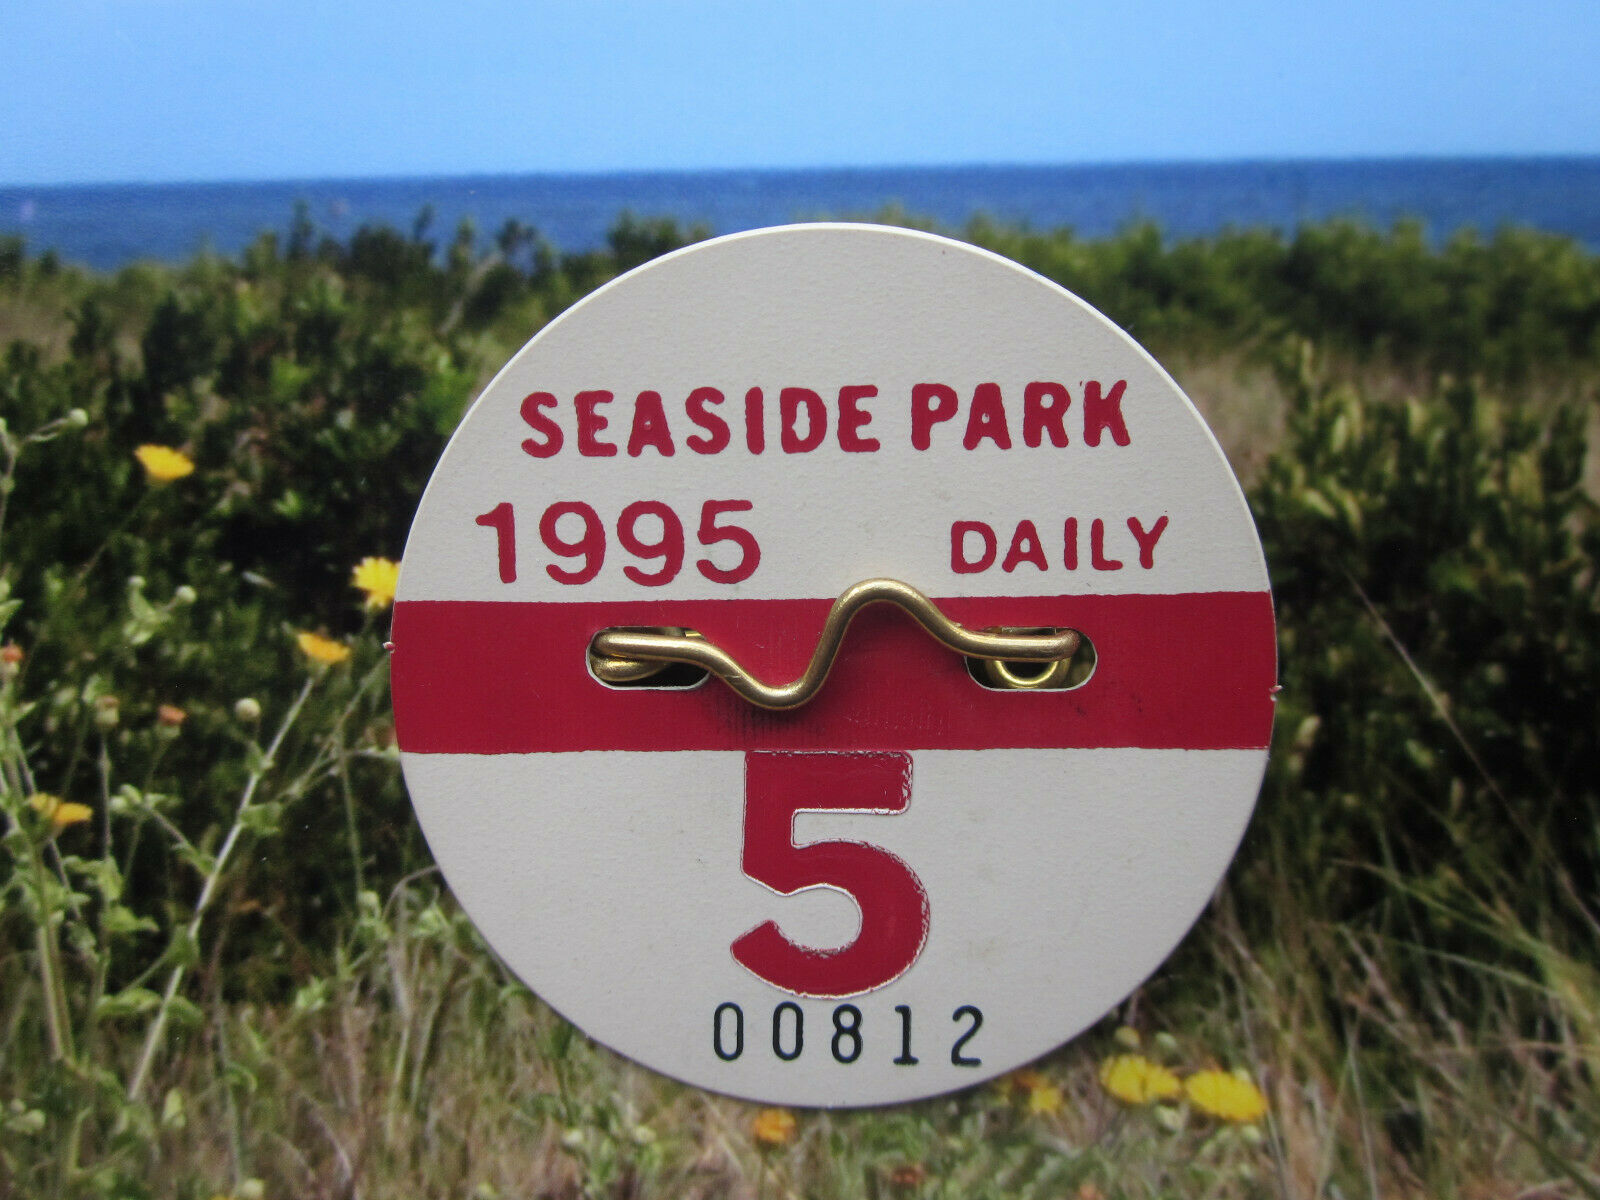 1995  Seaside   Park   New  Jersey  Daily  Beach   Badge/tag   26   Years  Old